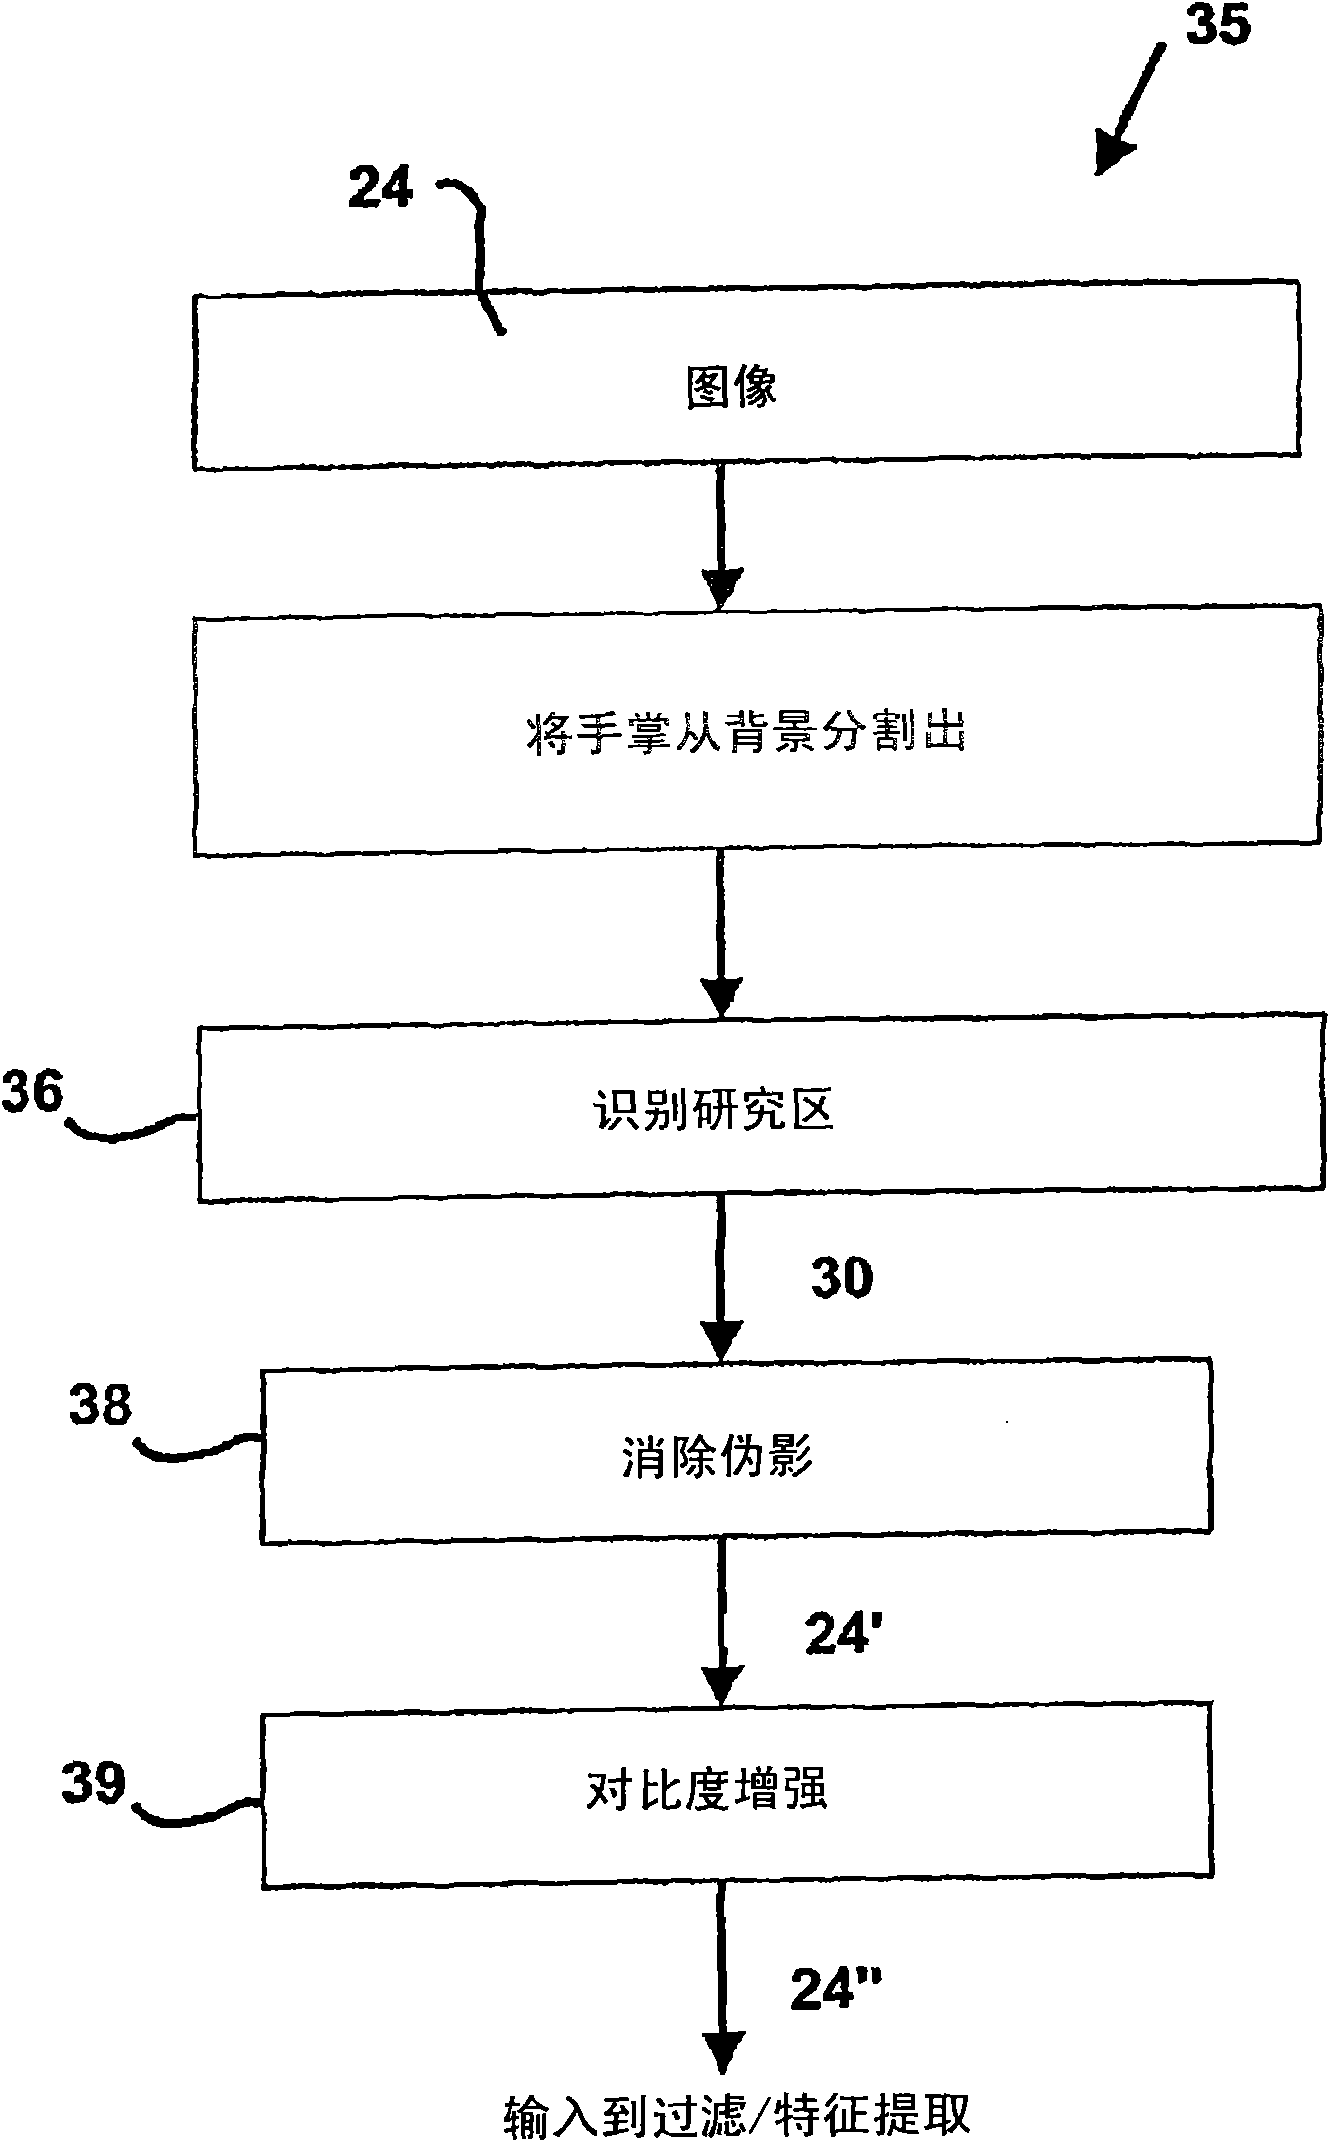 Method and apparatus for extraction and matching of biometric detail